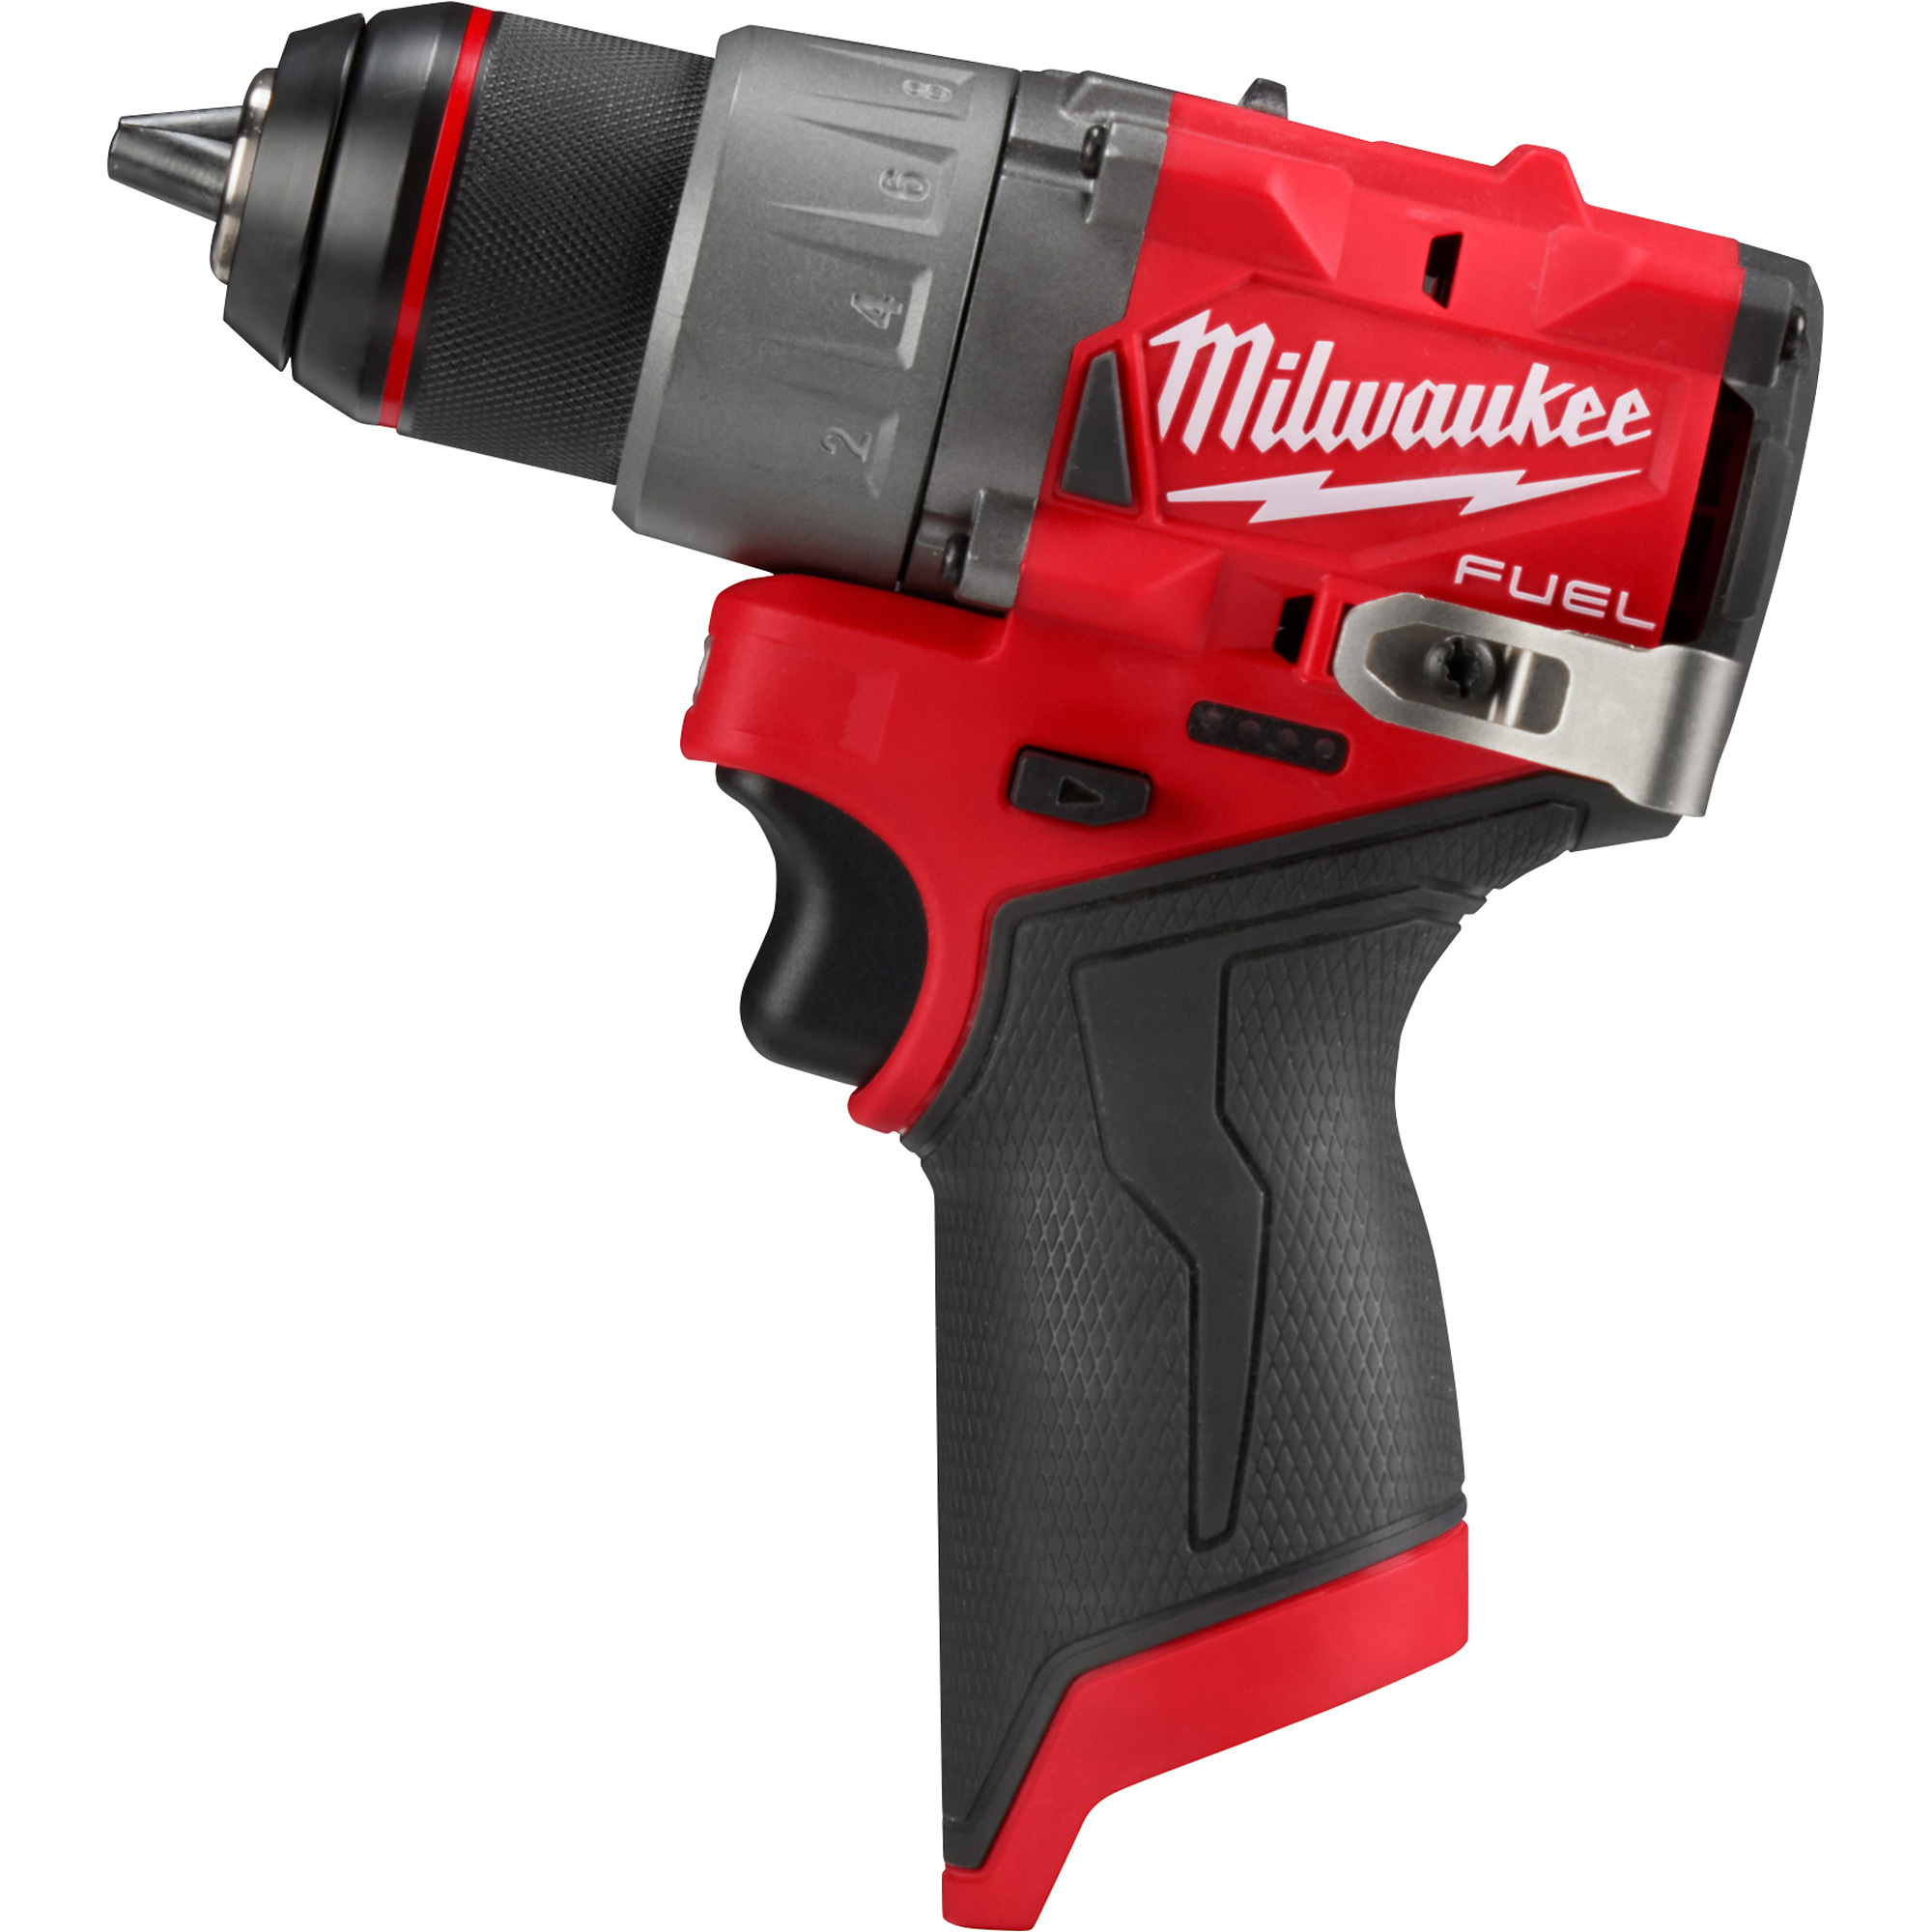 Milwaukee M12 FUEL 1/2Inch Drill/Driver, Tool Only, Model 3403-20